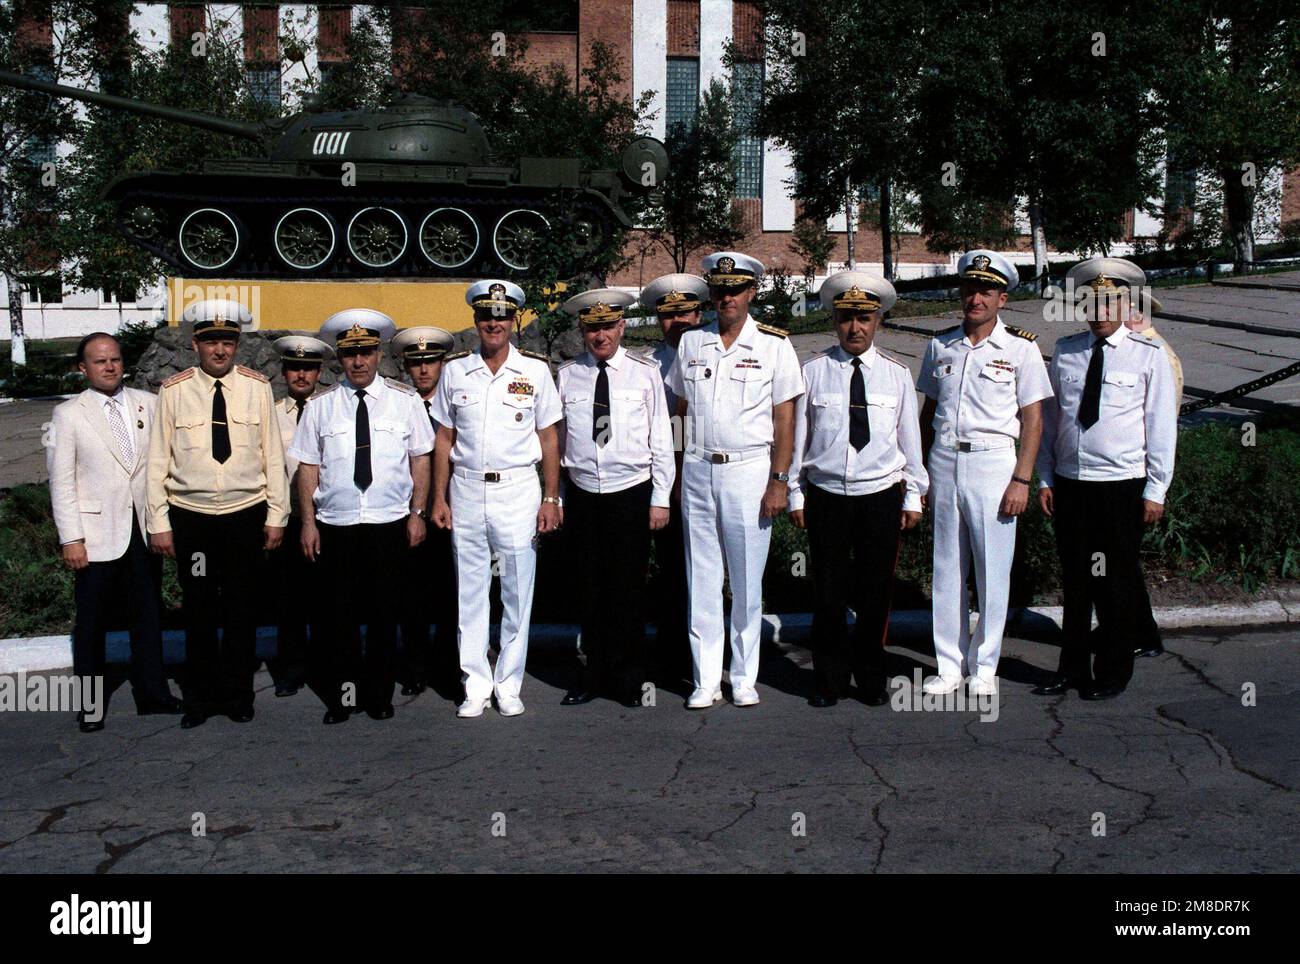 Admiral Gennadi Khvatov, front row, third from left, Commander, Soviet Pacific Fleet, Admiral Charles R. Larson, front row, fourth from left, Commander in CHIEF, US Pacific Fleet, and other US and Soviet officers Soviet officers gather in front of a T-54 tank at a Soviet navy service school during a visit to the city by two US Navy ships. The guided missile cruiser USS PRINCETON (CG-59) and the guided missile frigate USS REUBEN JAMES (FFG 57) are in Vladivostok for four days as part of a goodwill exchange program. Base: Vladivostok State: Siberia Country: U.S.S.R. (SUN) Stock Photo